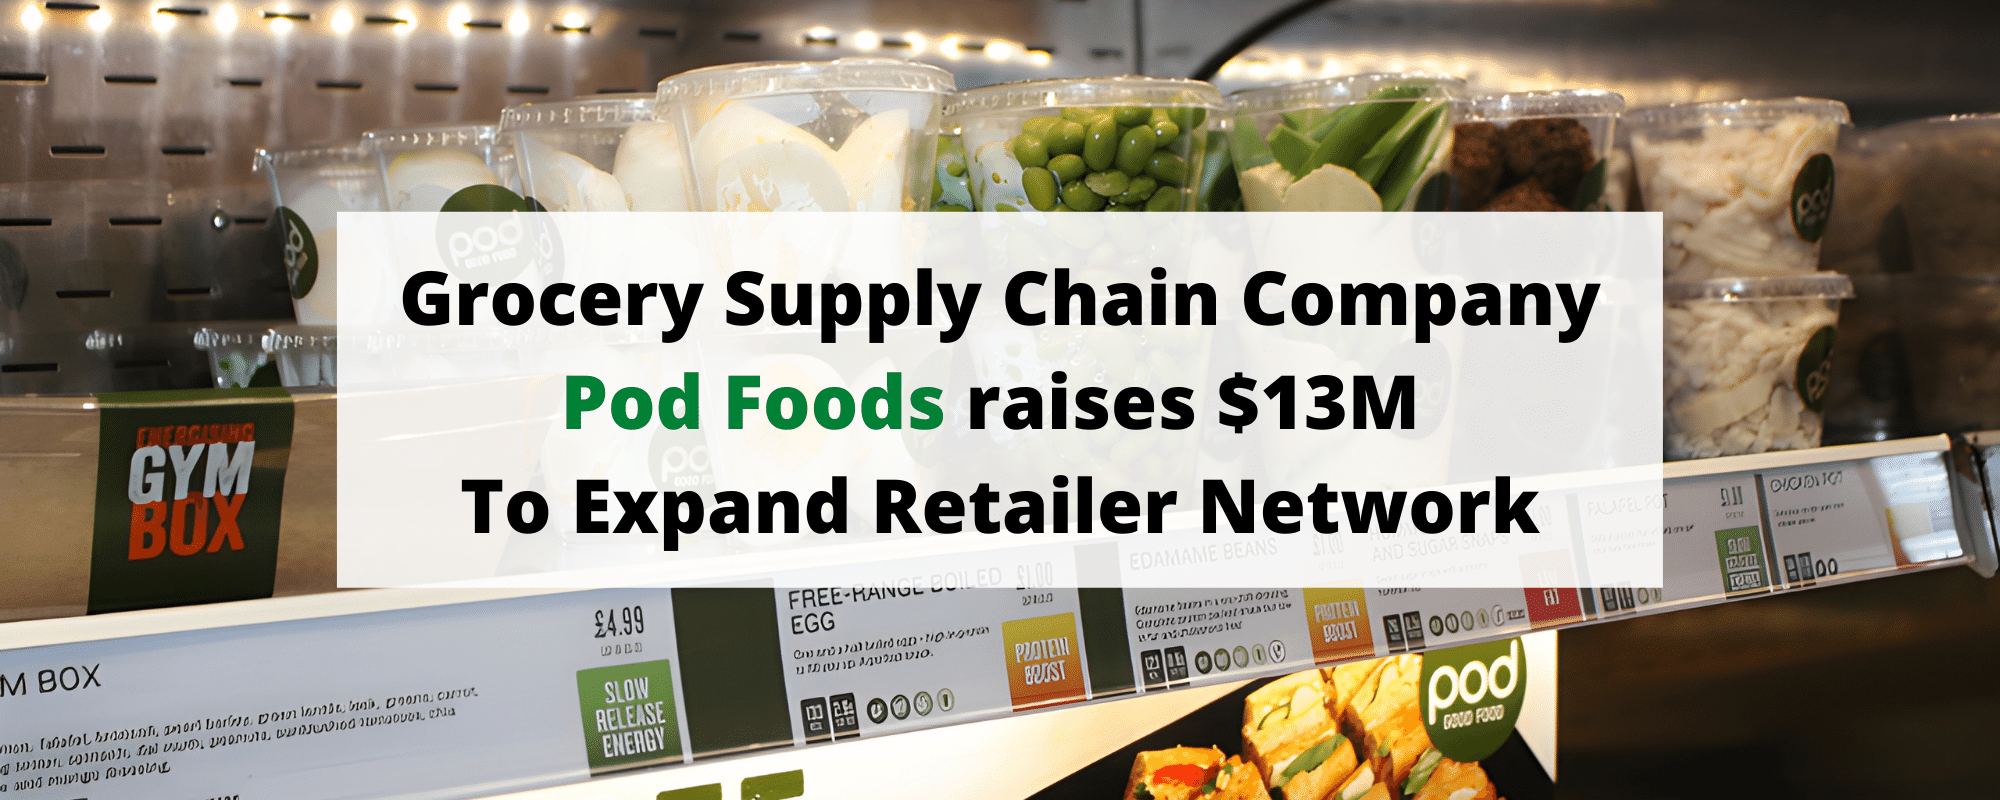 Grocery supply chain company Pod Foods